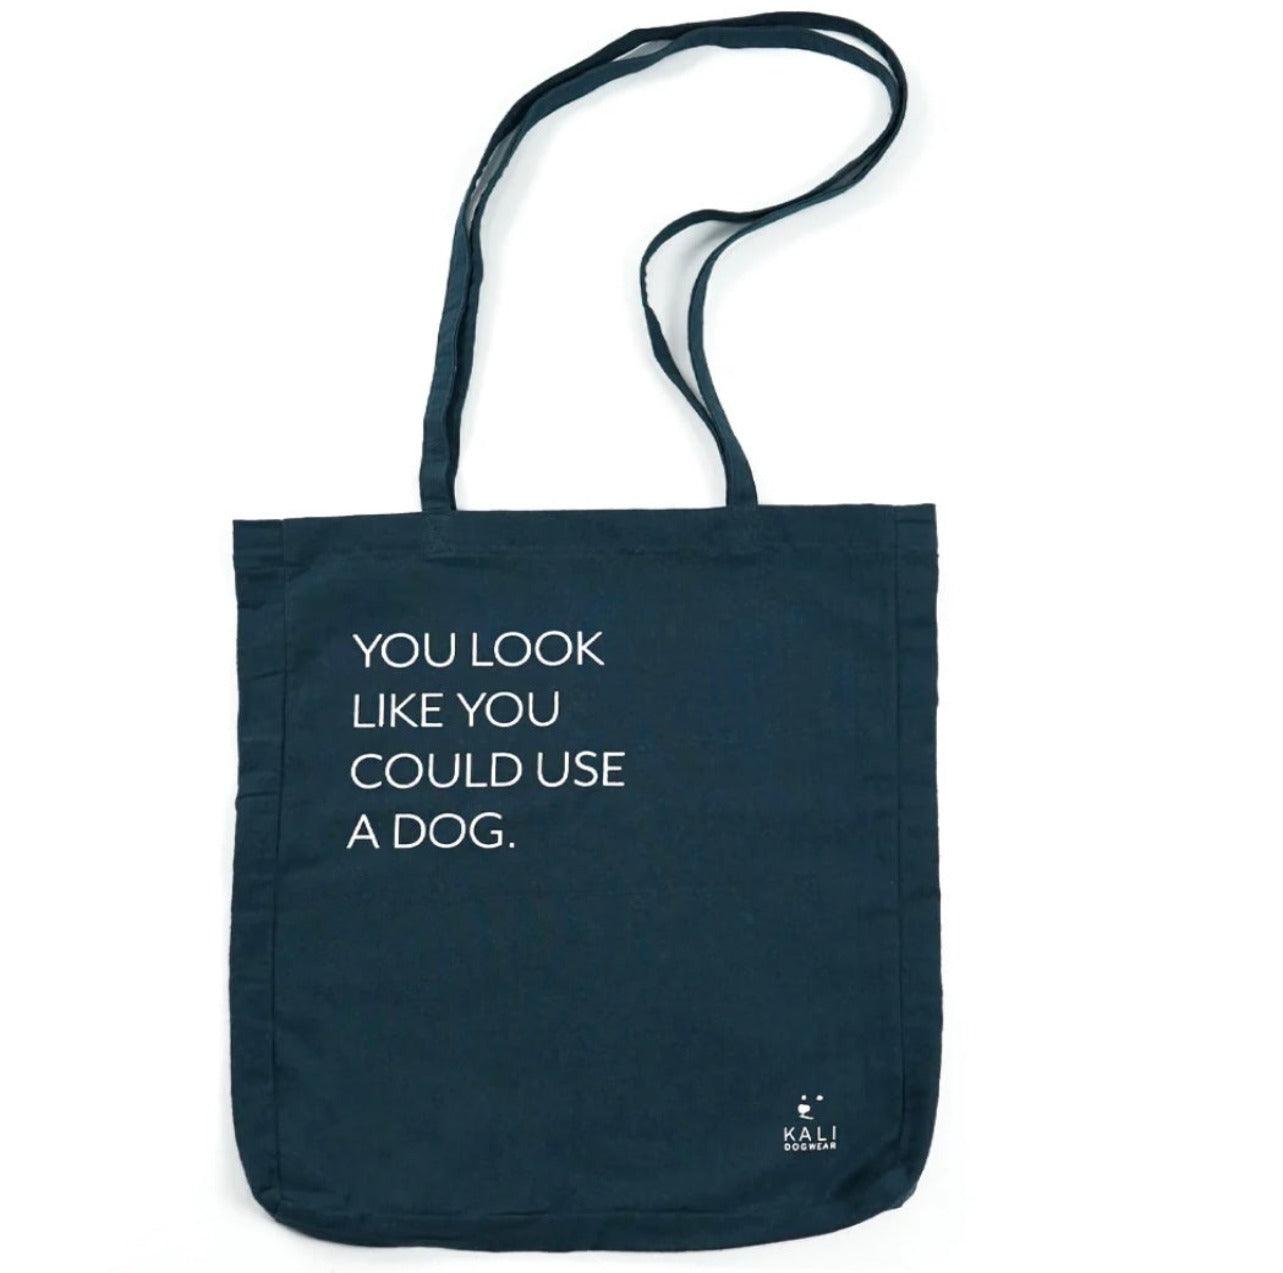 Tote Bag "Look Like" - Expat Life Style